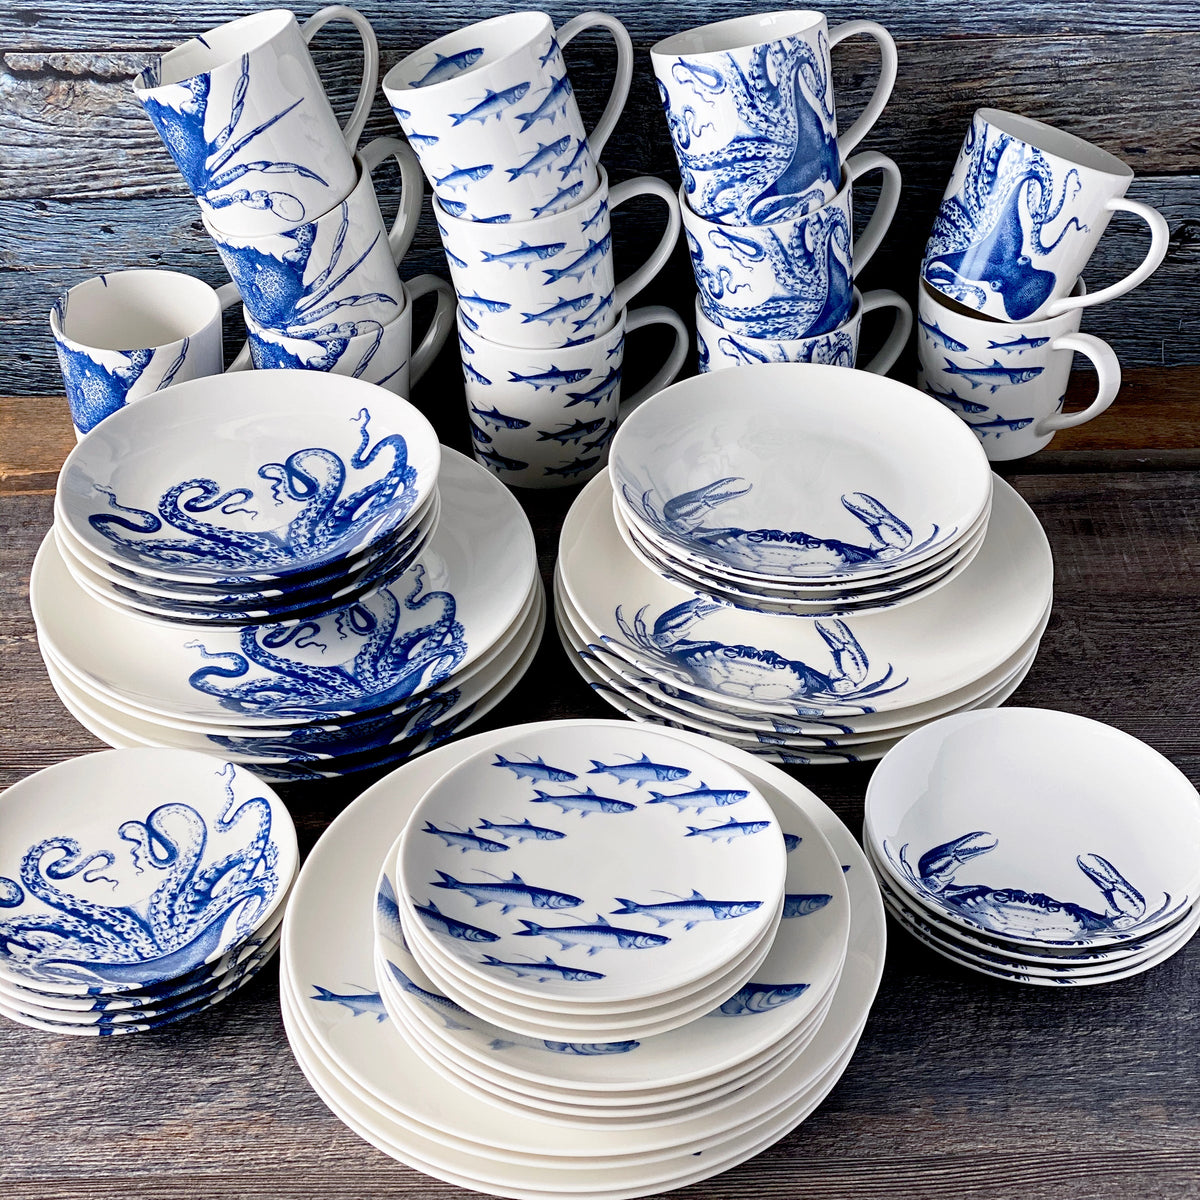 A Coastal Collection 48 Pc. Set by Caskata Artisanal Home, consisting of blue and white plates and cups, is placed on a wooden table, exuding a tranquil sea and ocean vibe with beautiful patterns.